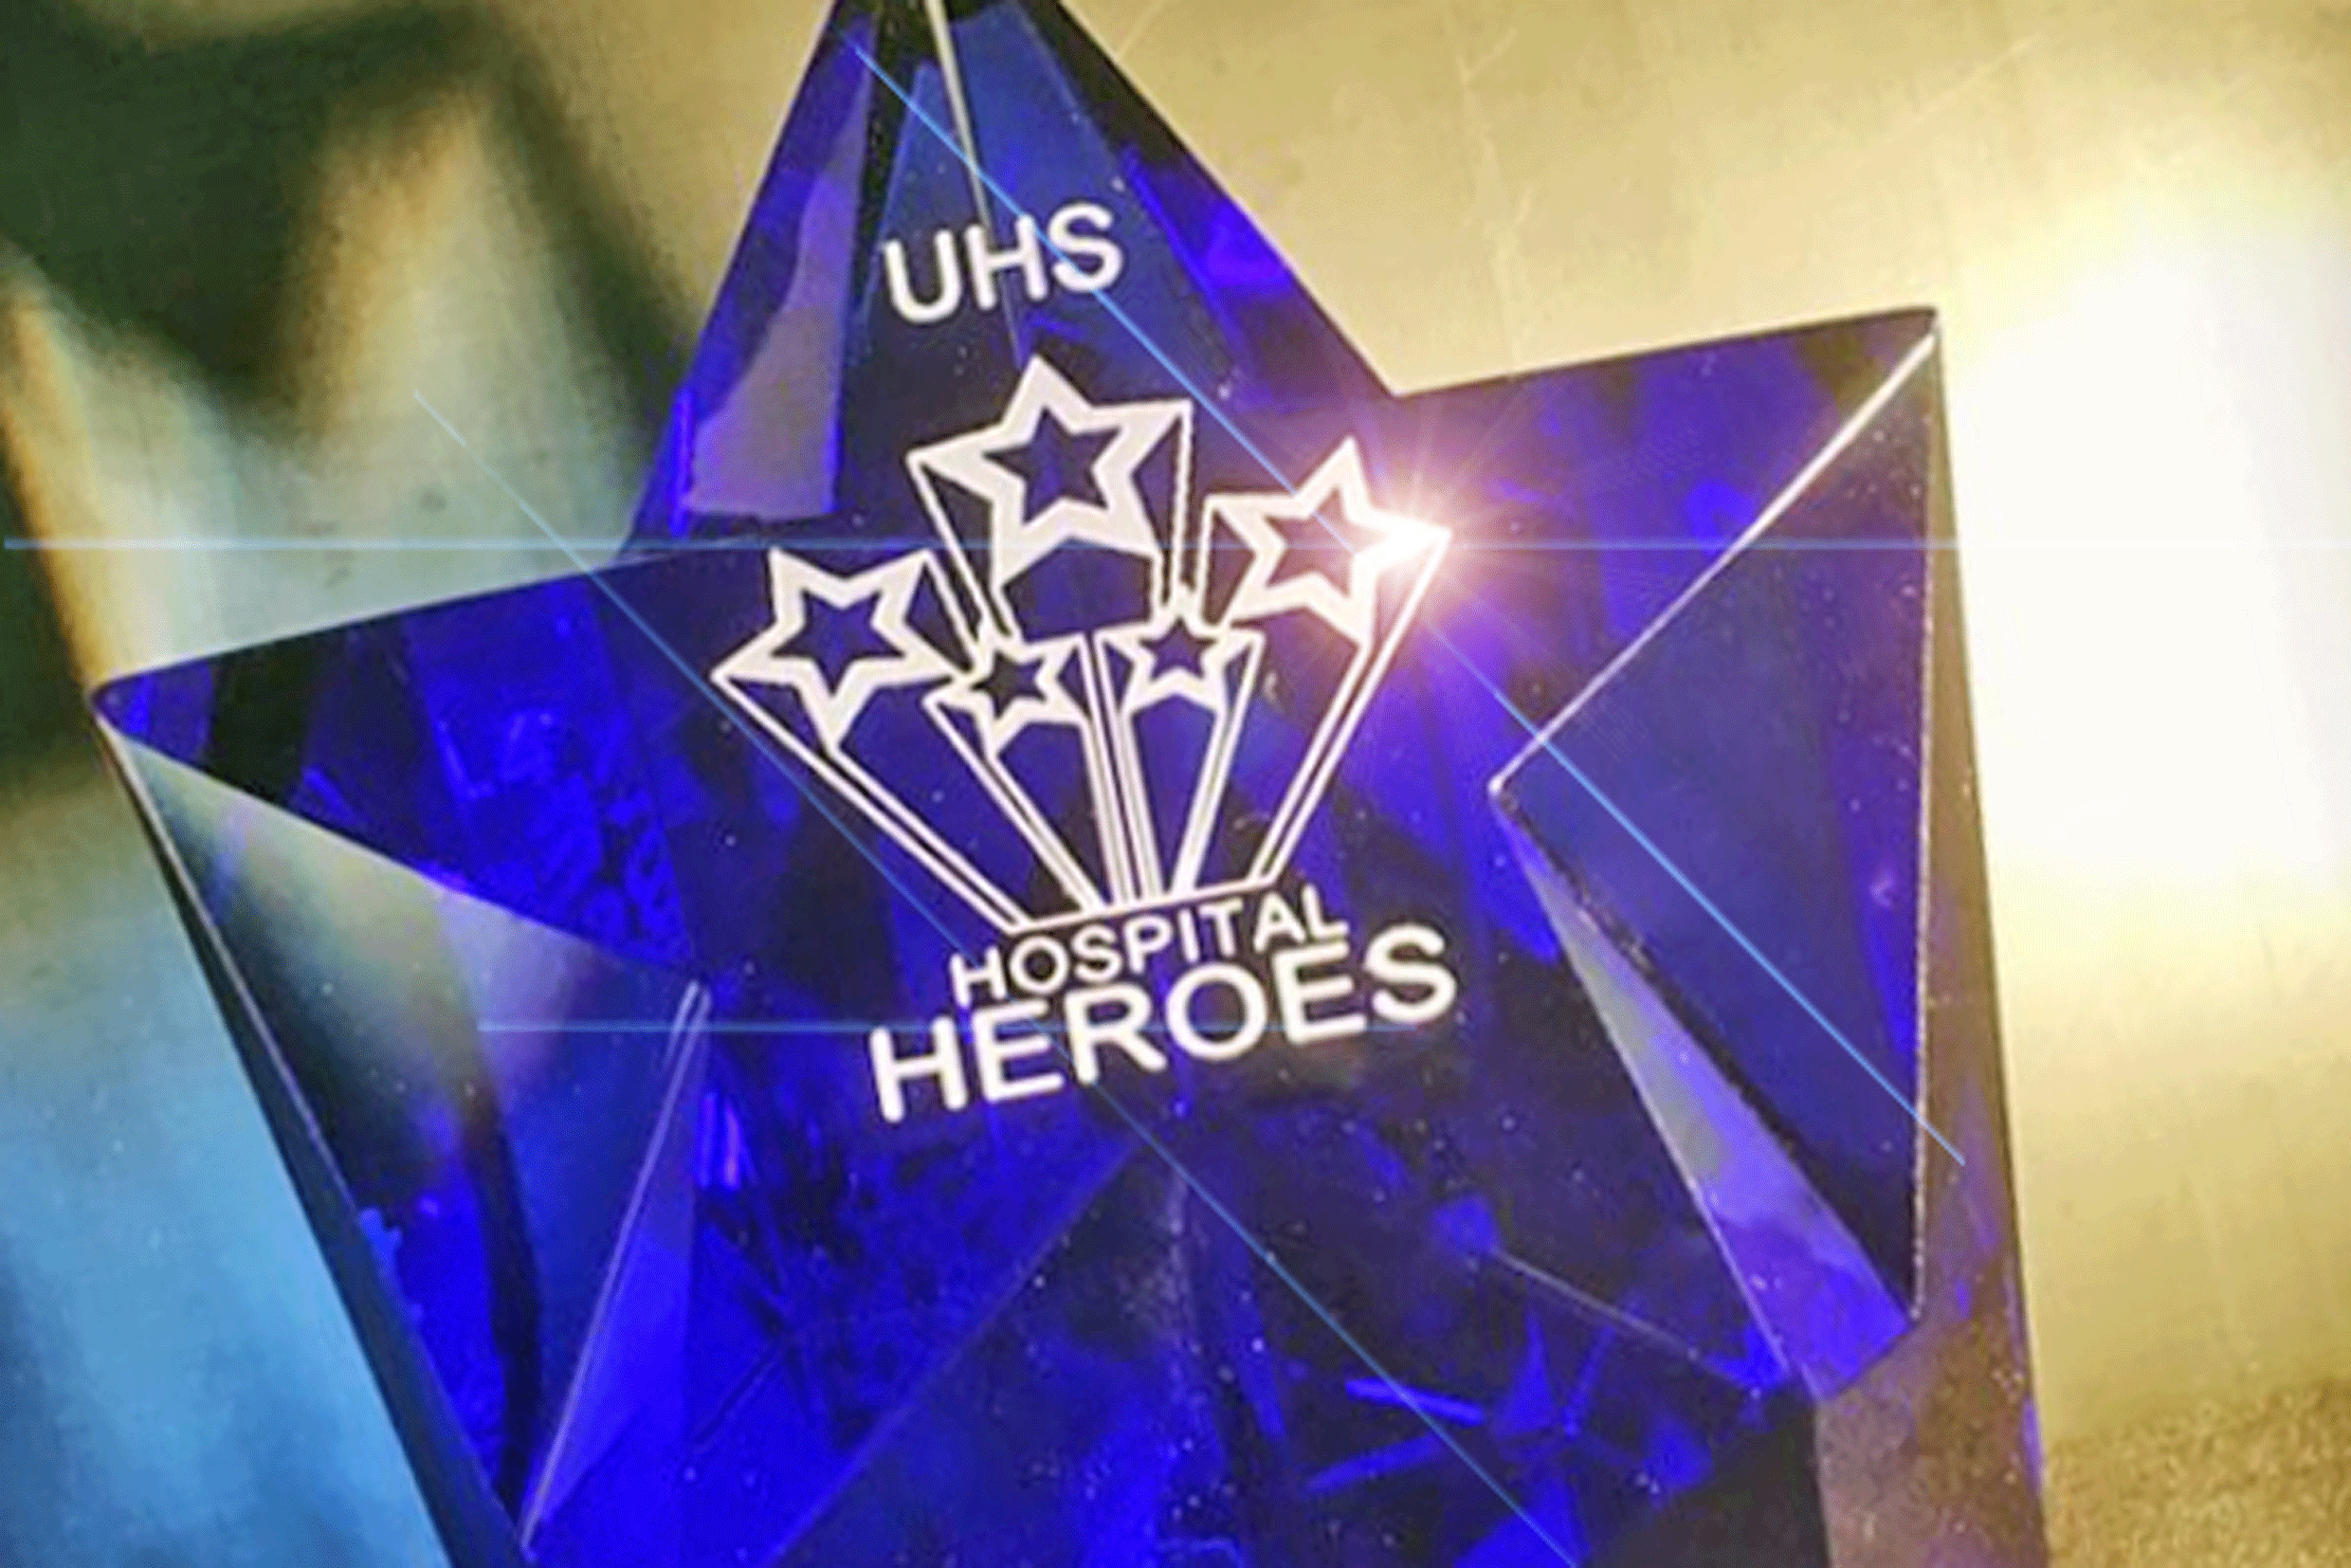 Beautiful blue crystal star award - produced for the NHS